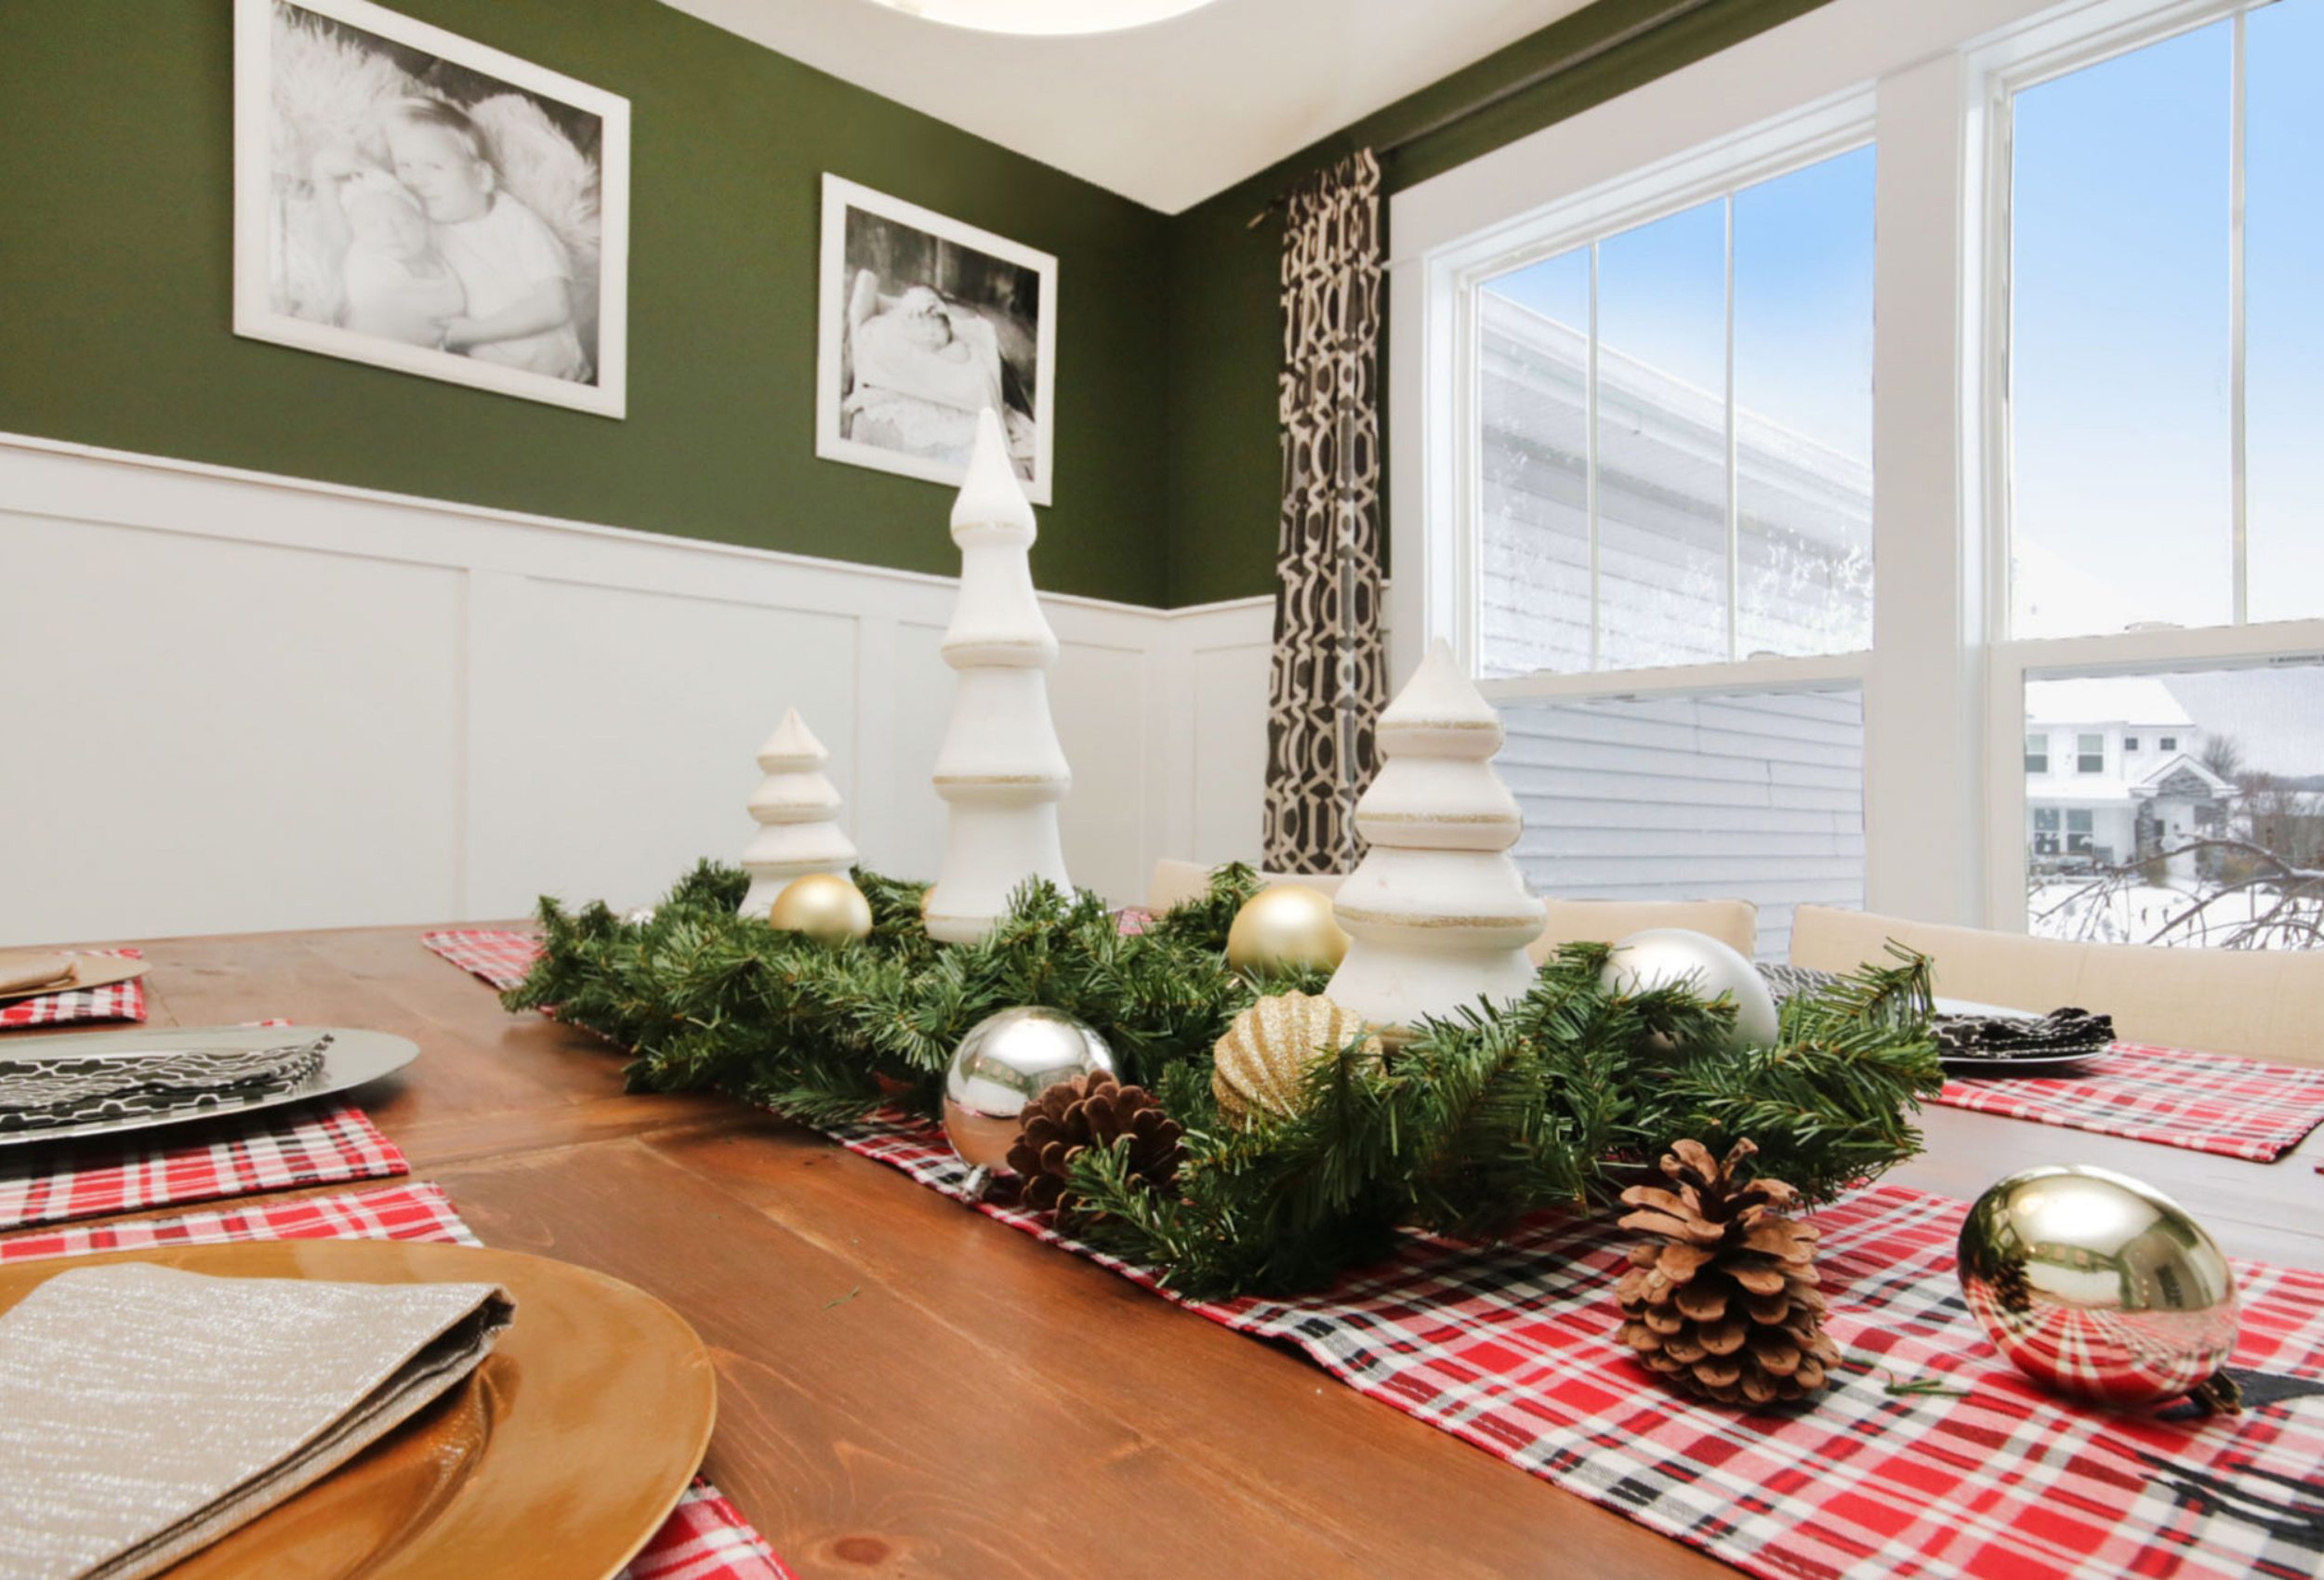 Home for the Holidays - 2019 Year-End Mashup | Eastbrook Homes